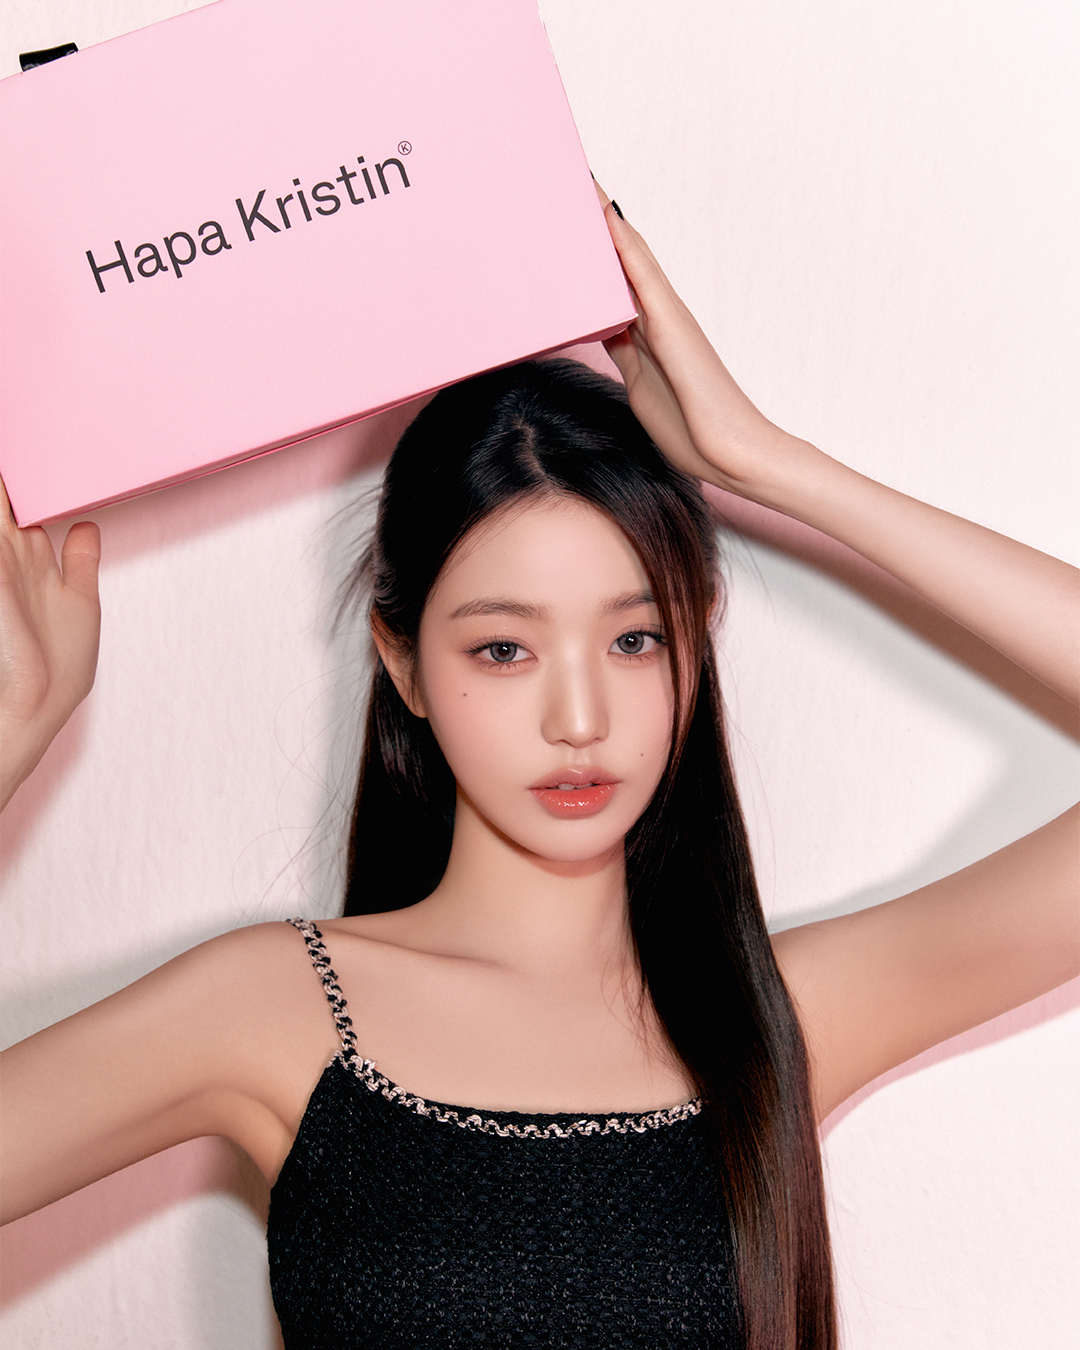 HapaKristin_SEA on X: 𝘋𝘦𝘸𝘺 𝘒𝘳𝘪𝘴𝘵𝘪𝘯 𝘸𝘪𝘵𝘩 𝘑𝘢𝘯𝘨 𝘞𝘰𝘯  𝘠𝘰𝘶𝘯𝘨 Flower in the springtime🧚‍♀️ Purchase 5 or more contacts, FREE  Kristin Mini Camera 📸 👉 #IVE #Youthfullens  #Yo